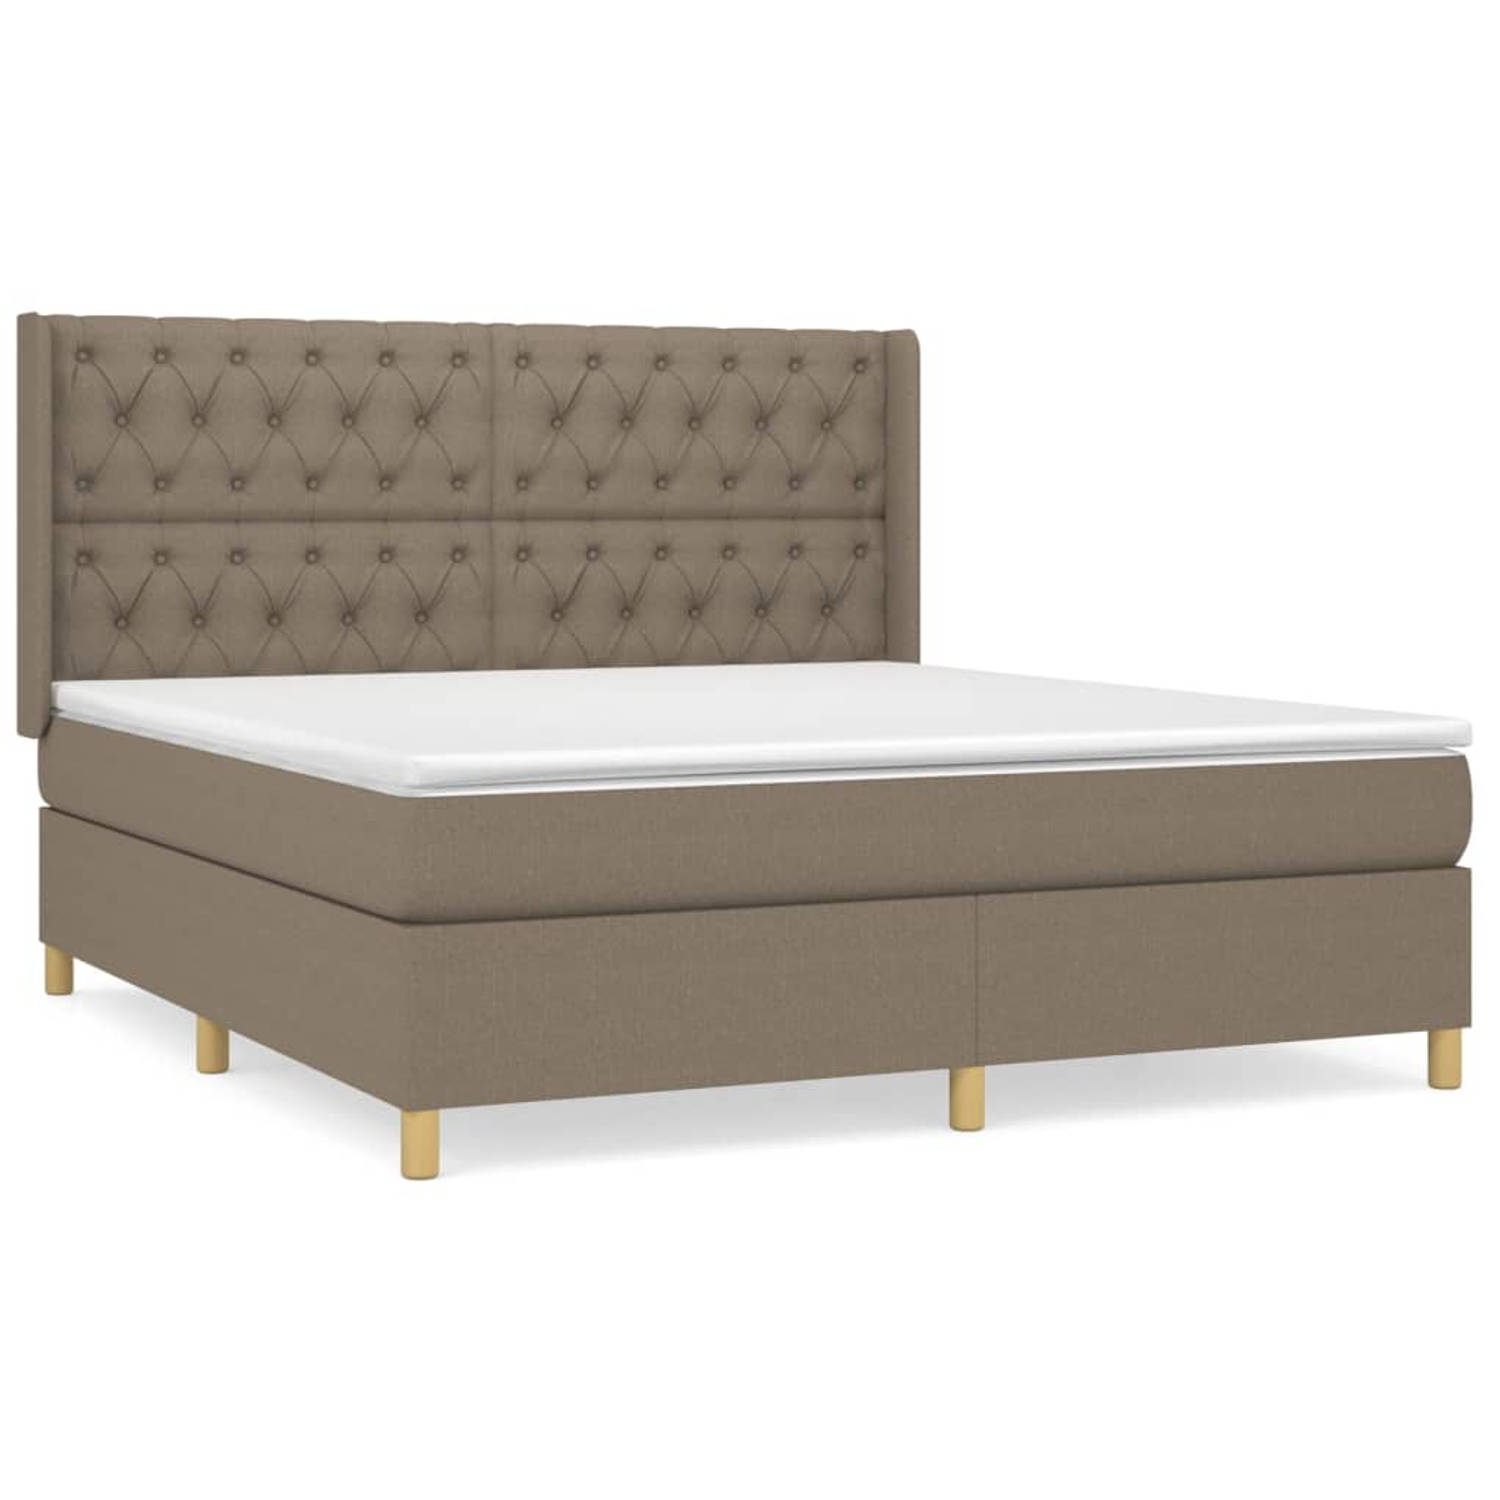 The Living Store Boxspringbed - Comfort - Bed - 203 x 163 x 118/128 cm - Taupe - Stof (100% polyester)